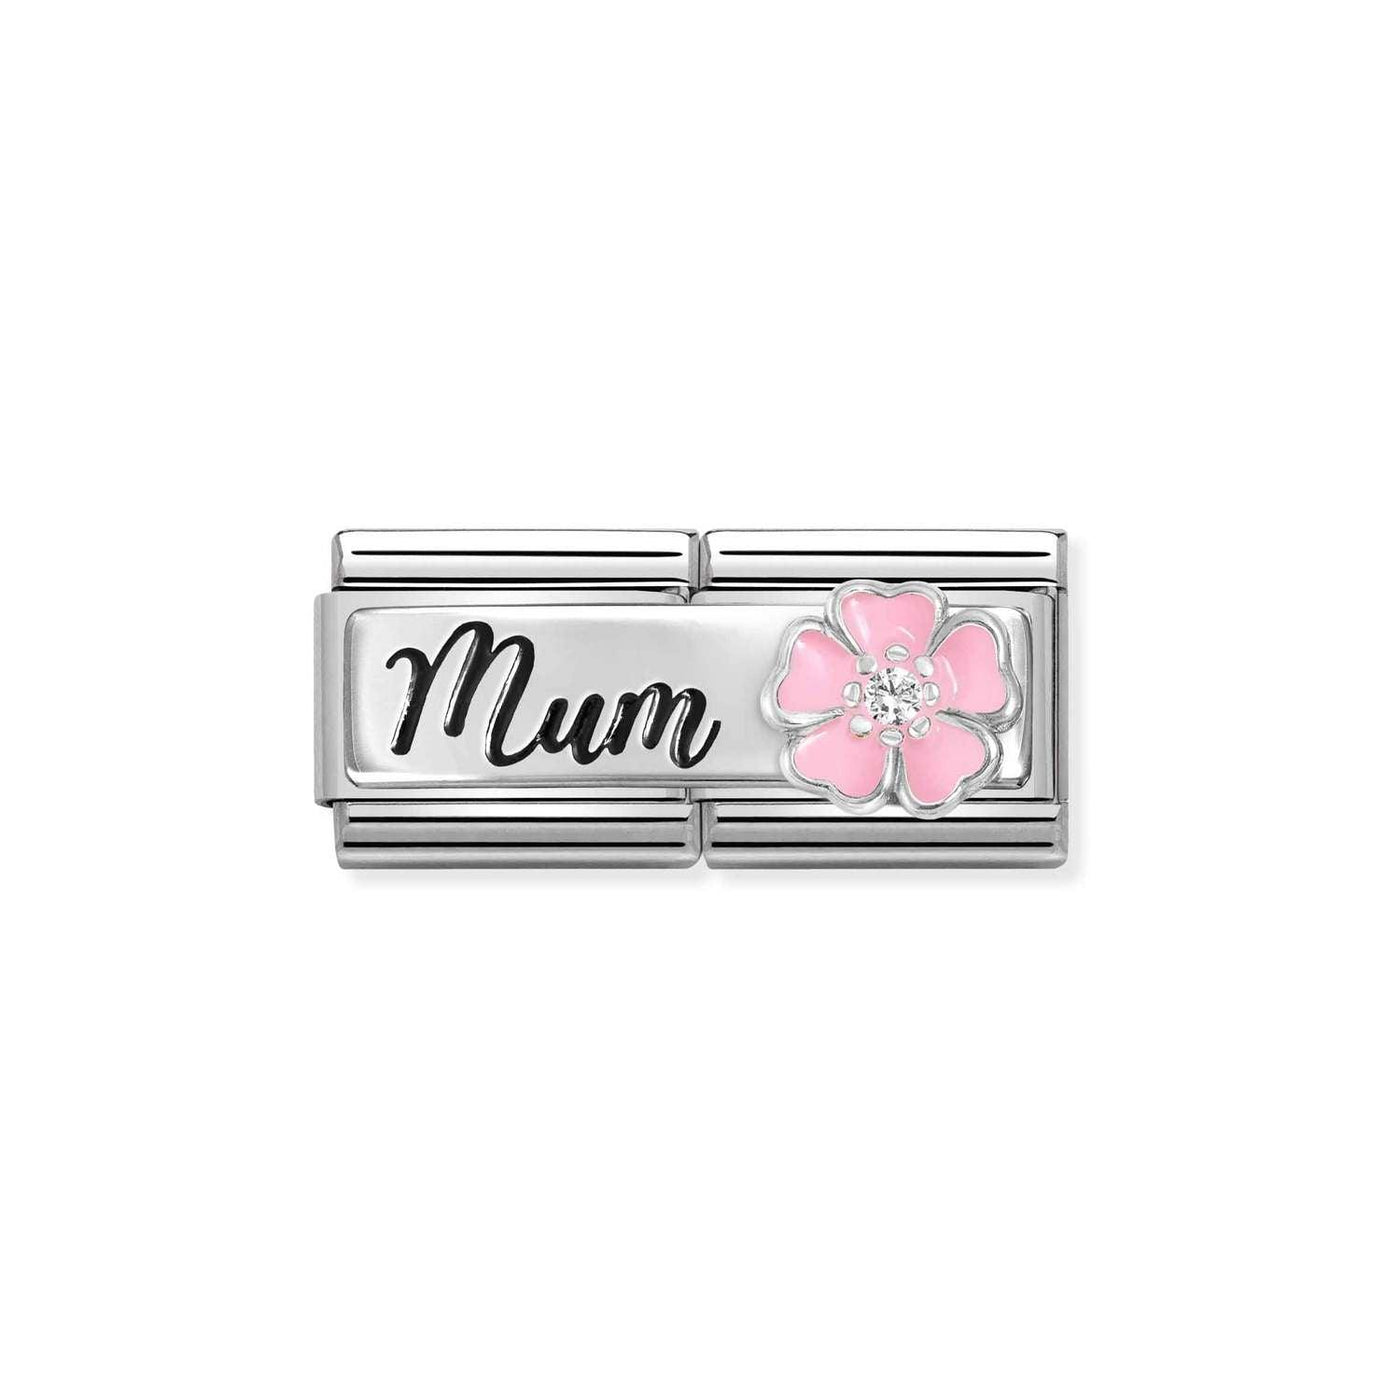 Nomination Silver Double Link Charm with Mum and Pink Flower